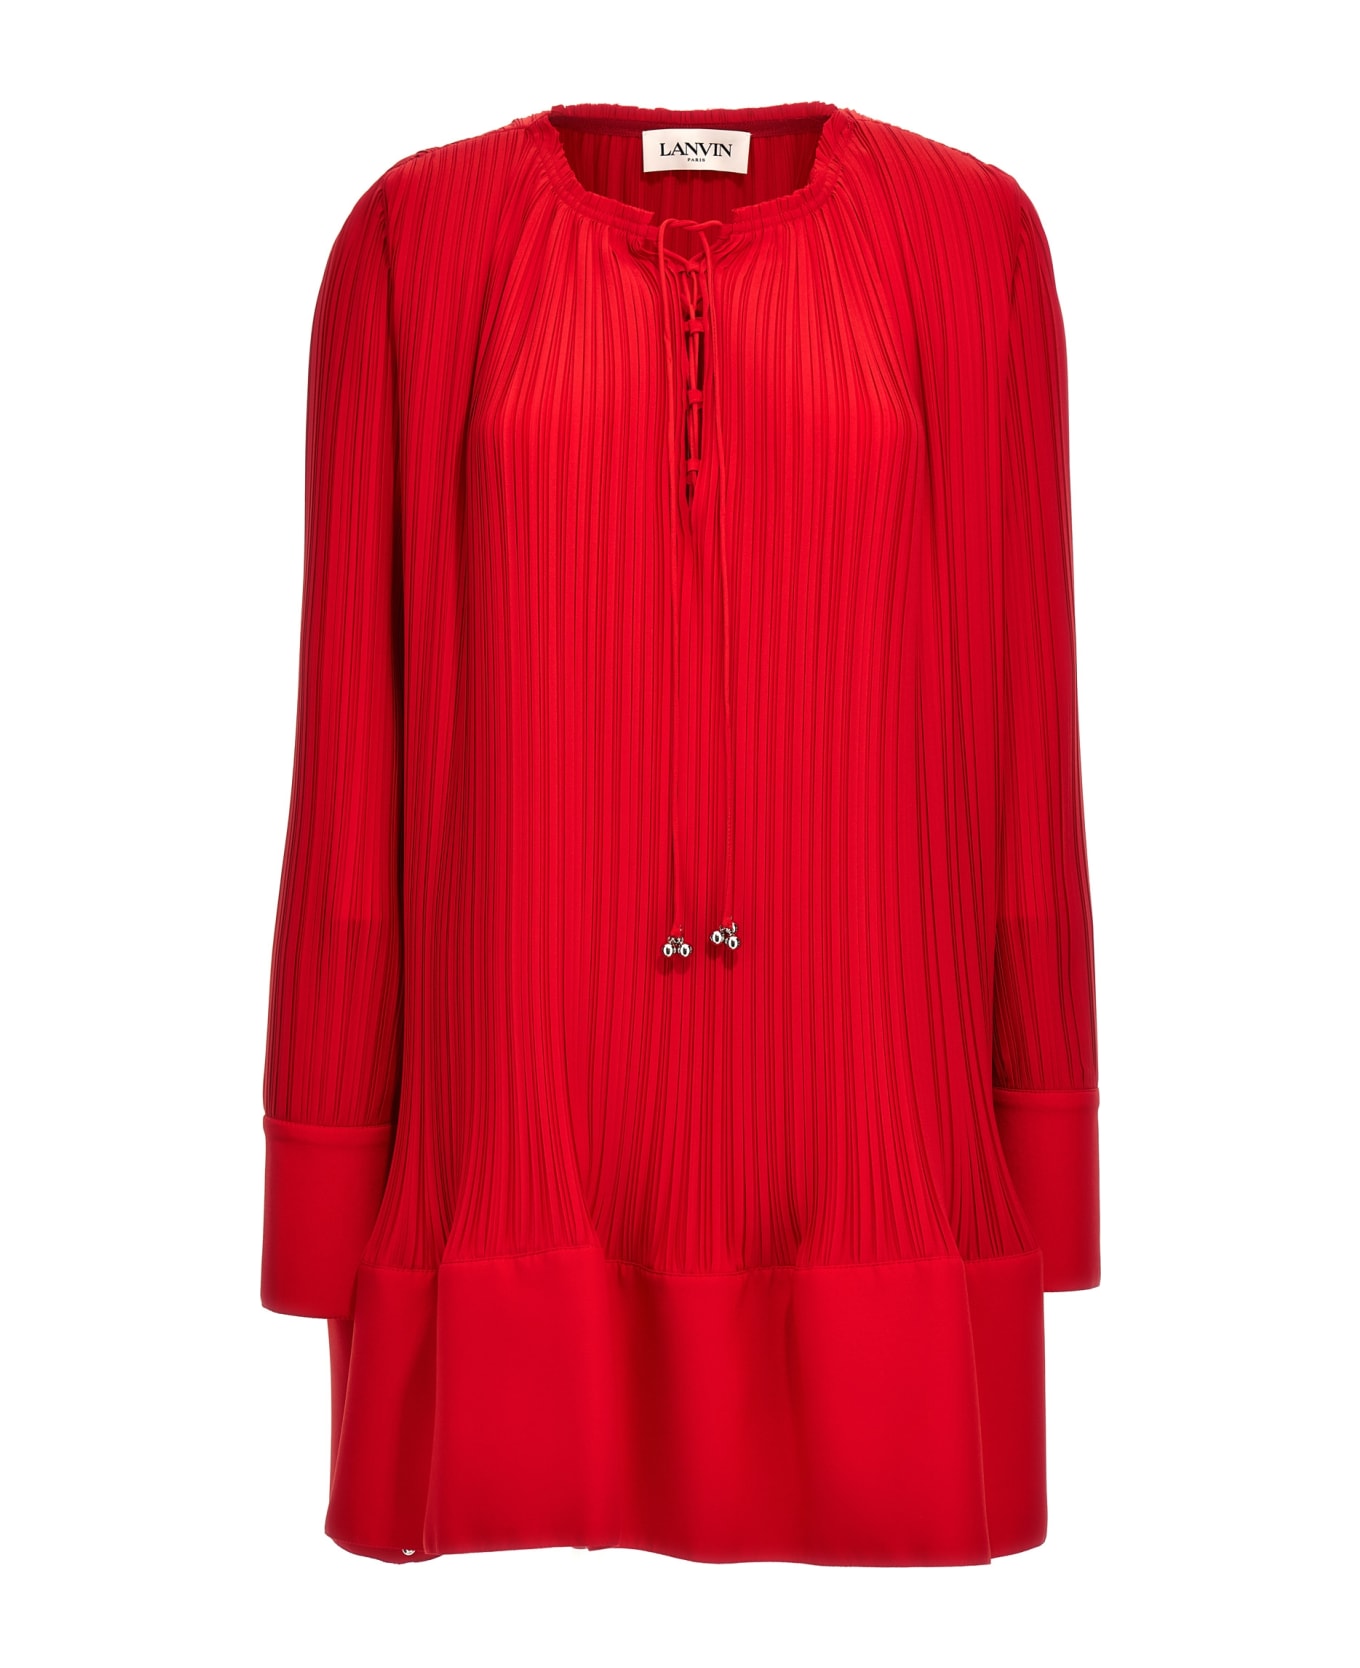 Lanvin 'flared Pleated' Dress - Red